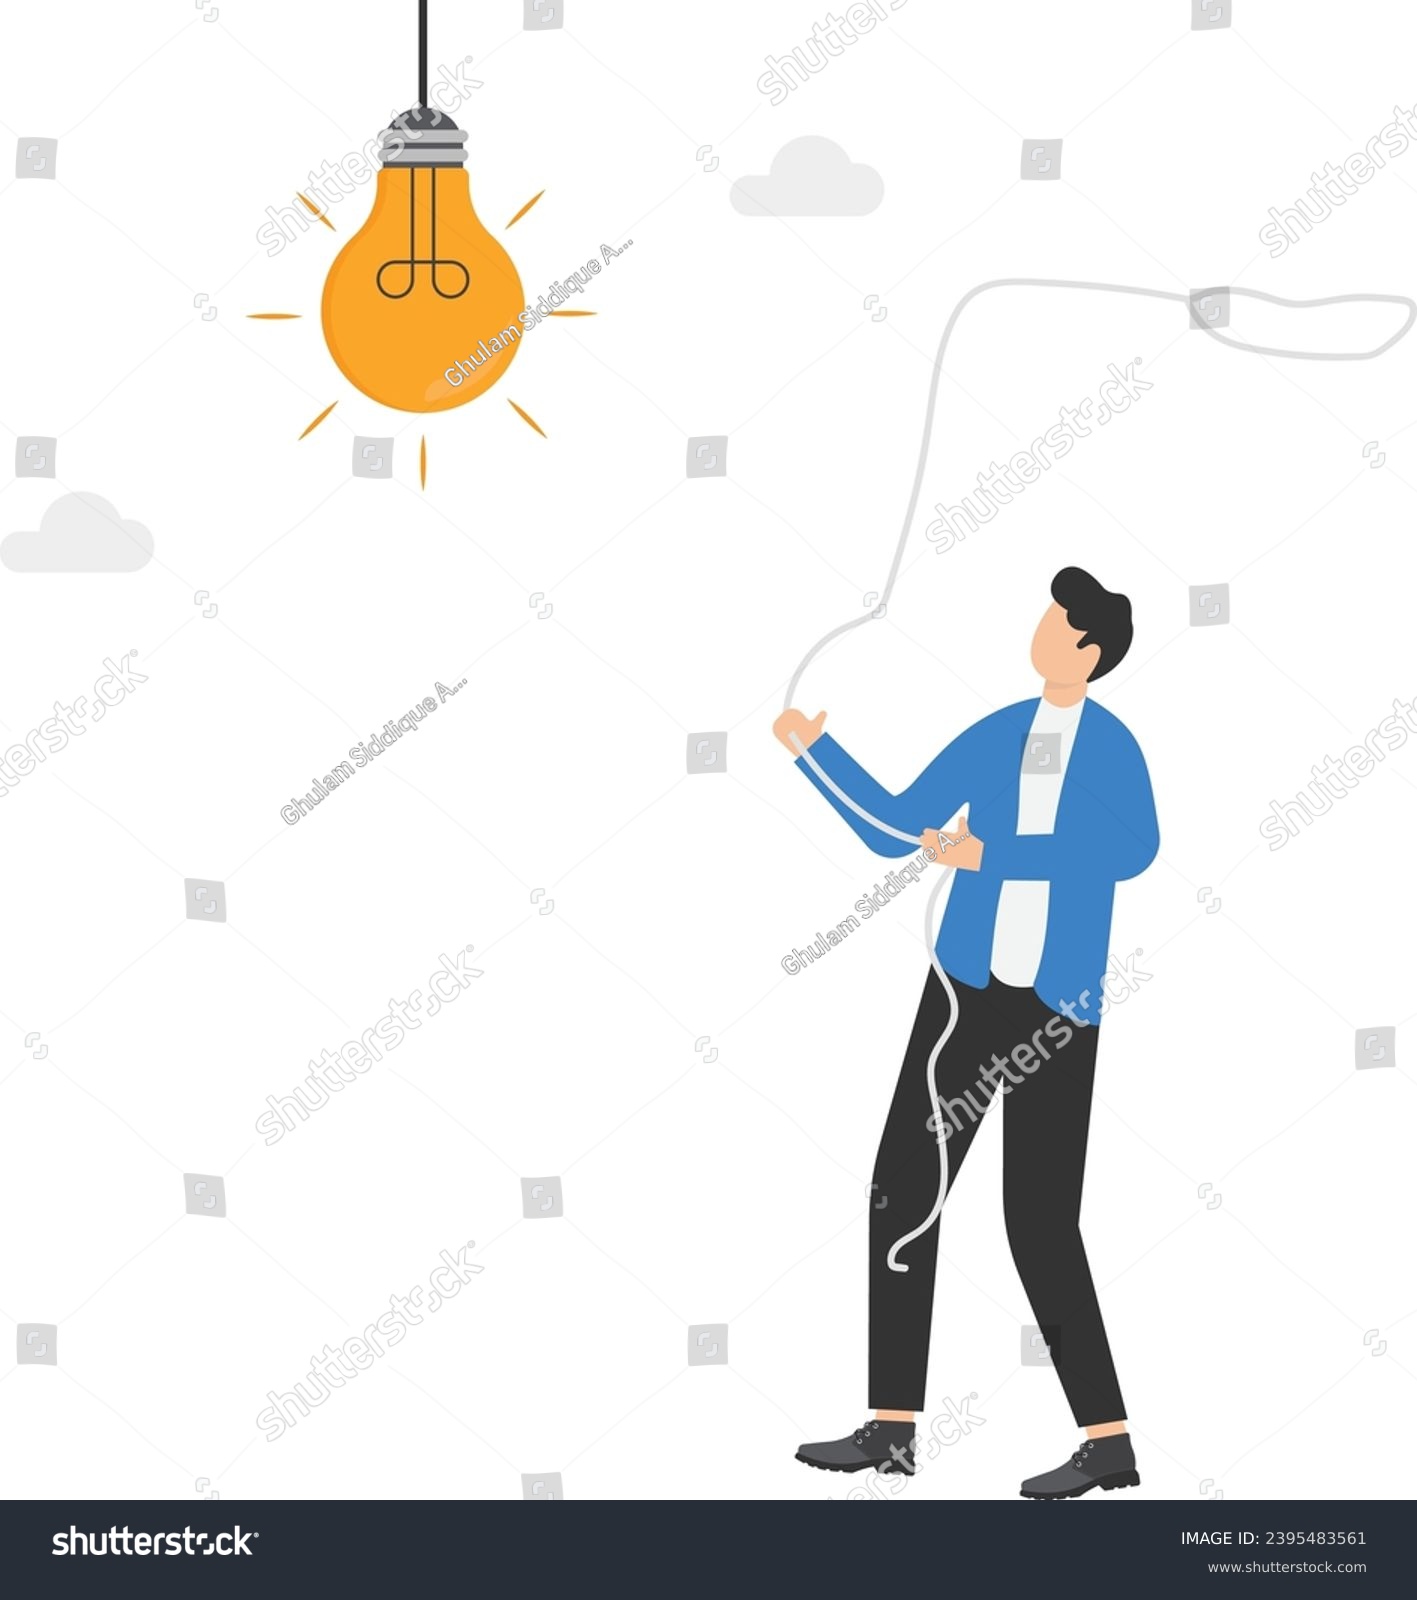 SVG of Businessman try to catch idea,competition,chasing for reward or work success,Capture new business ideas, search for innovation or creativity, brainstorm or invent new discovery project concept, smart  svg